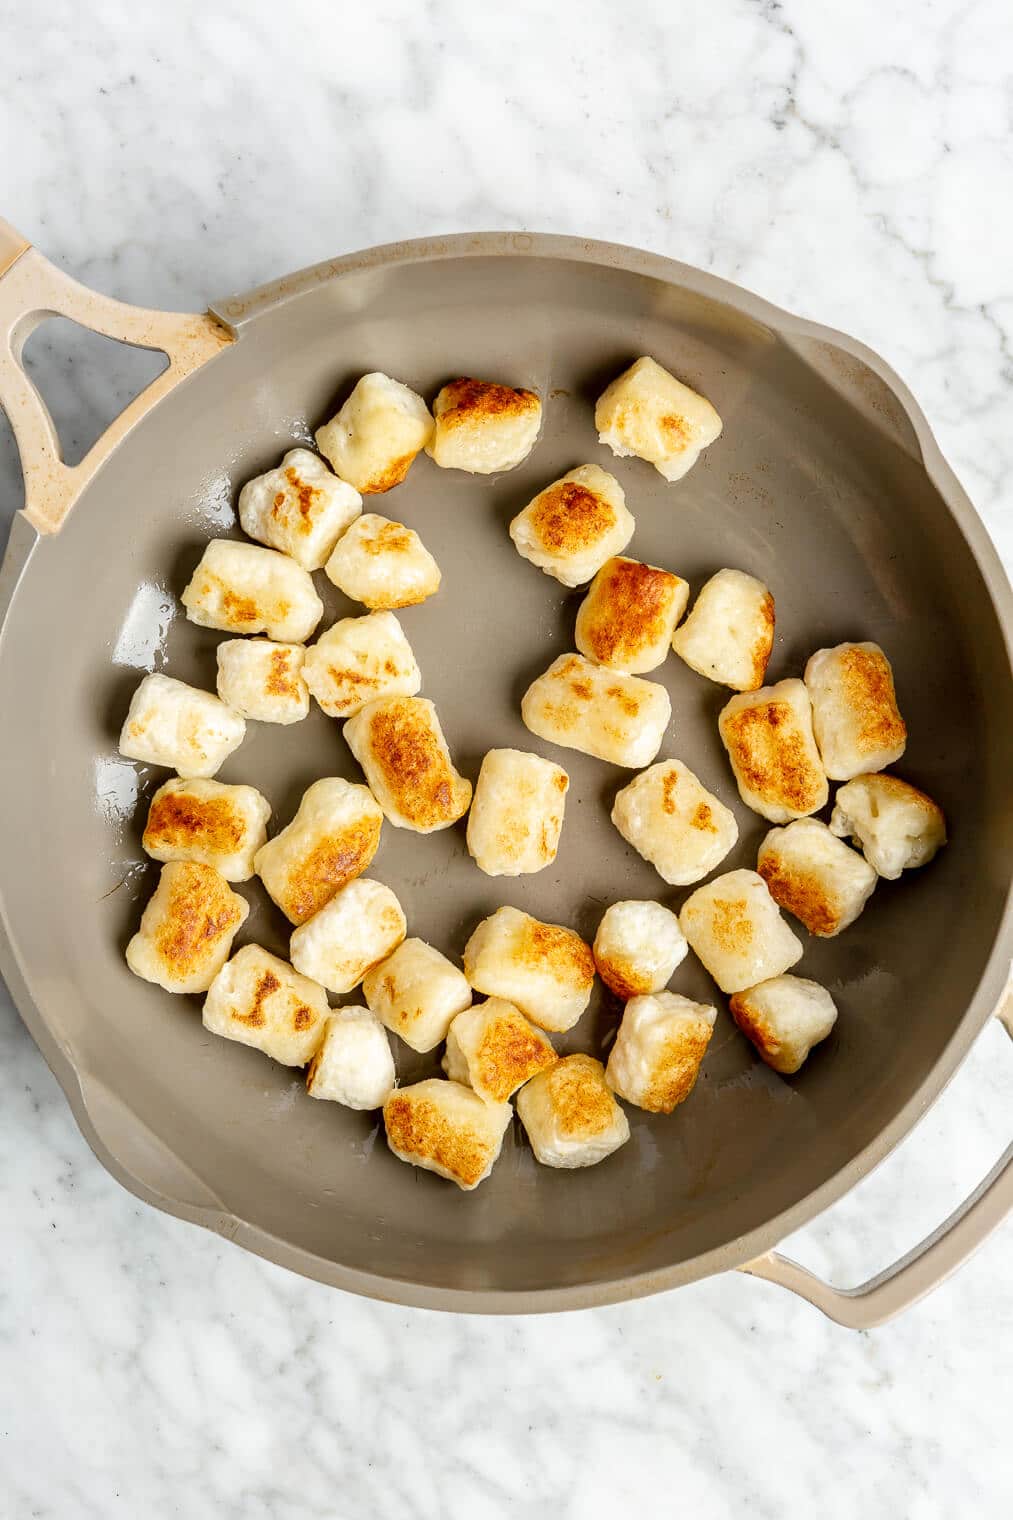 Browned gnocchi in a pan.